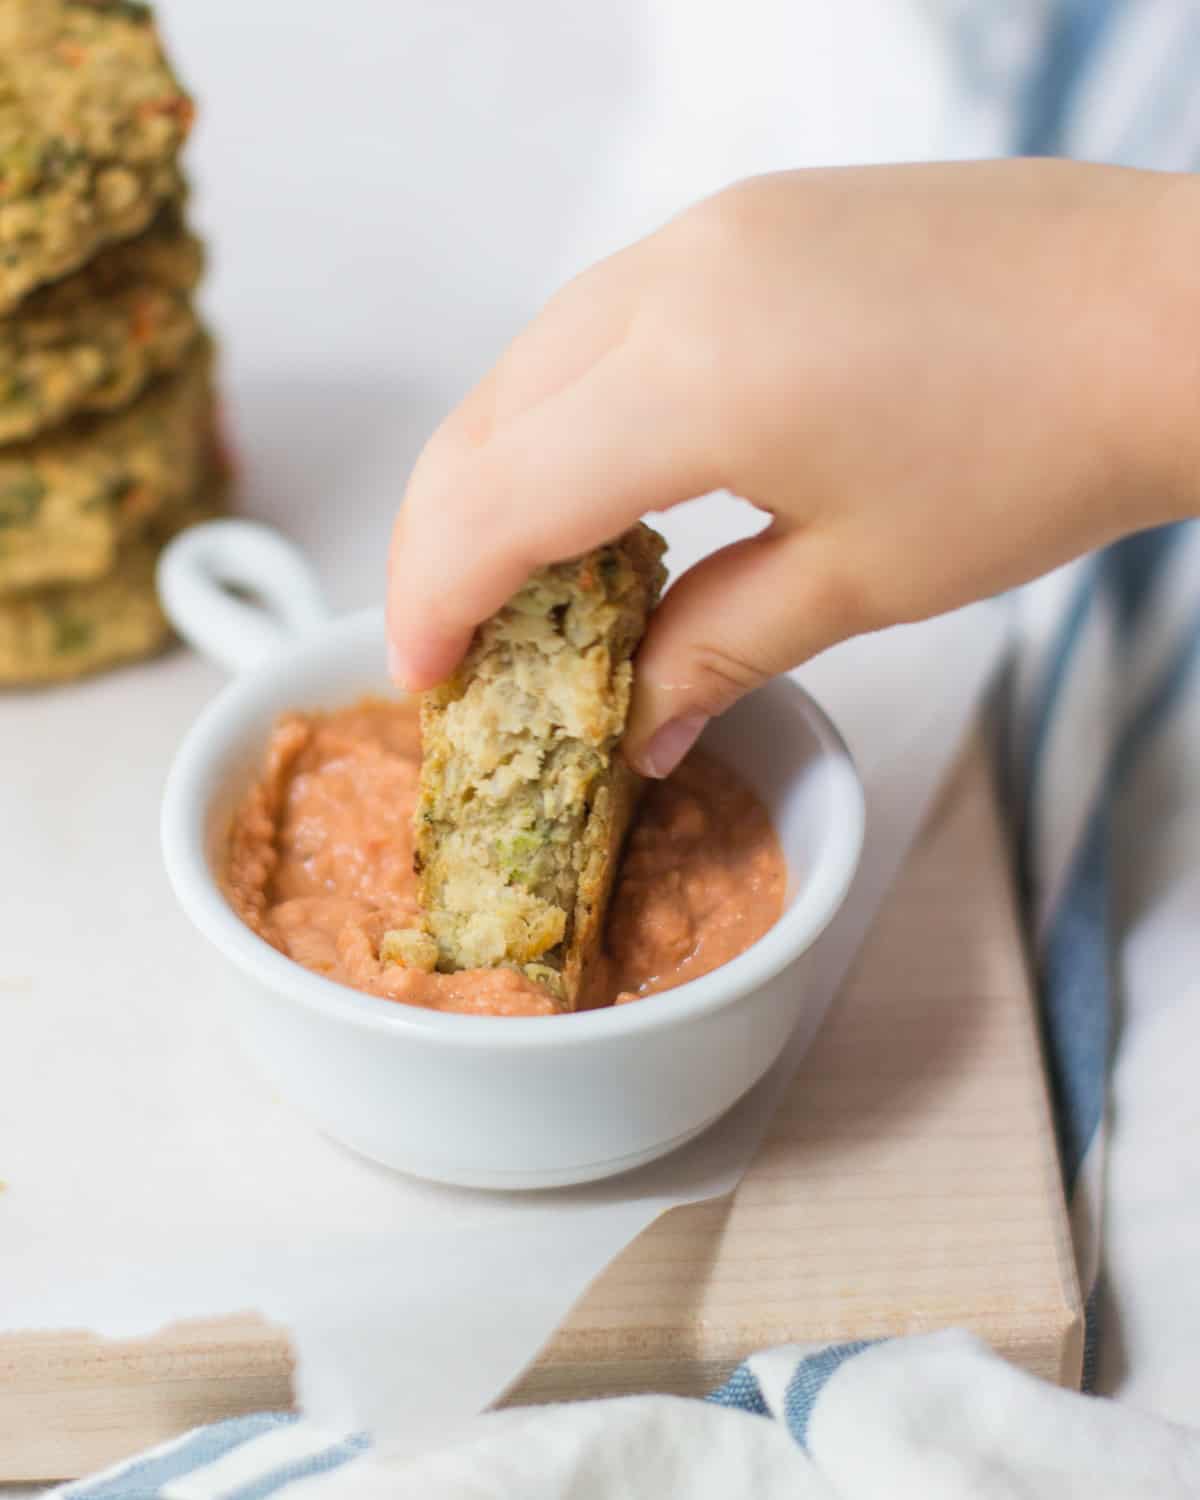 a toddler's hand dunking the chickpea cakes in pizza hummus